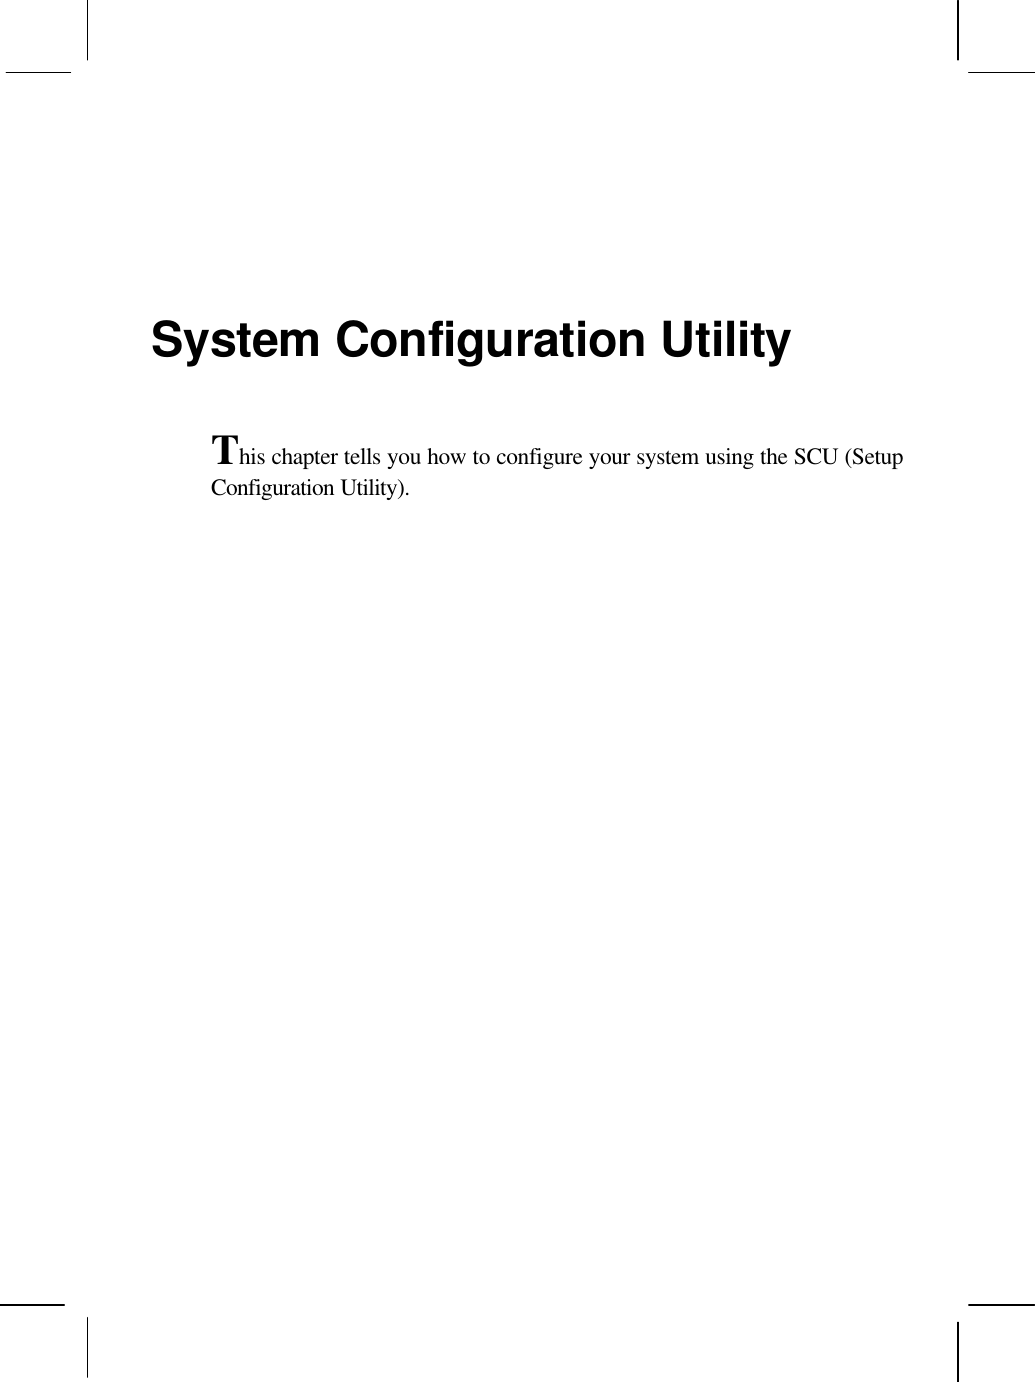 System Configuration UtilityThis chapter tells you how to configure your system using the SCU (SetupConfiguration Utility).